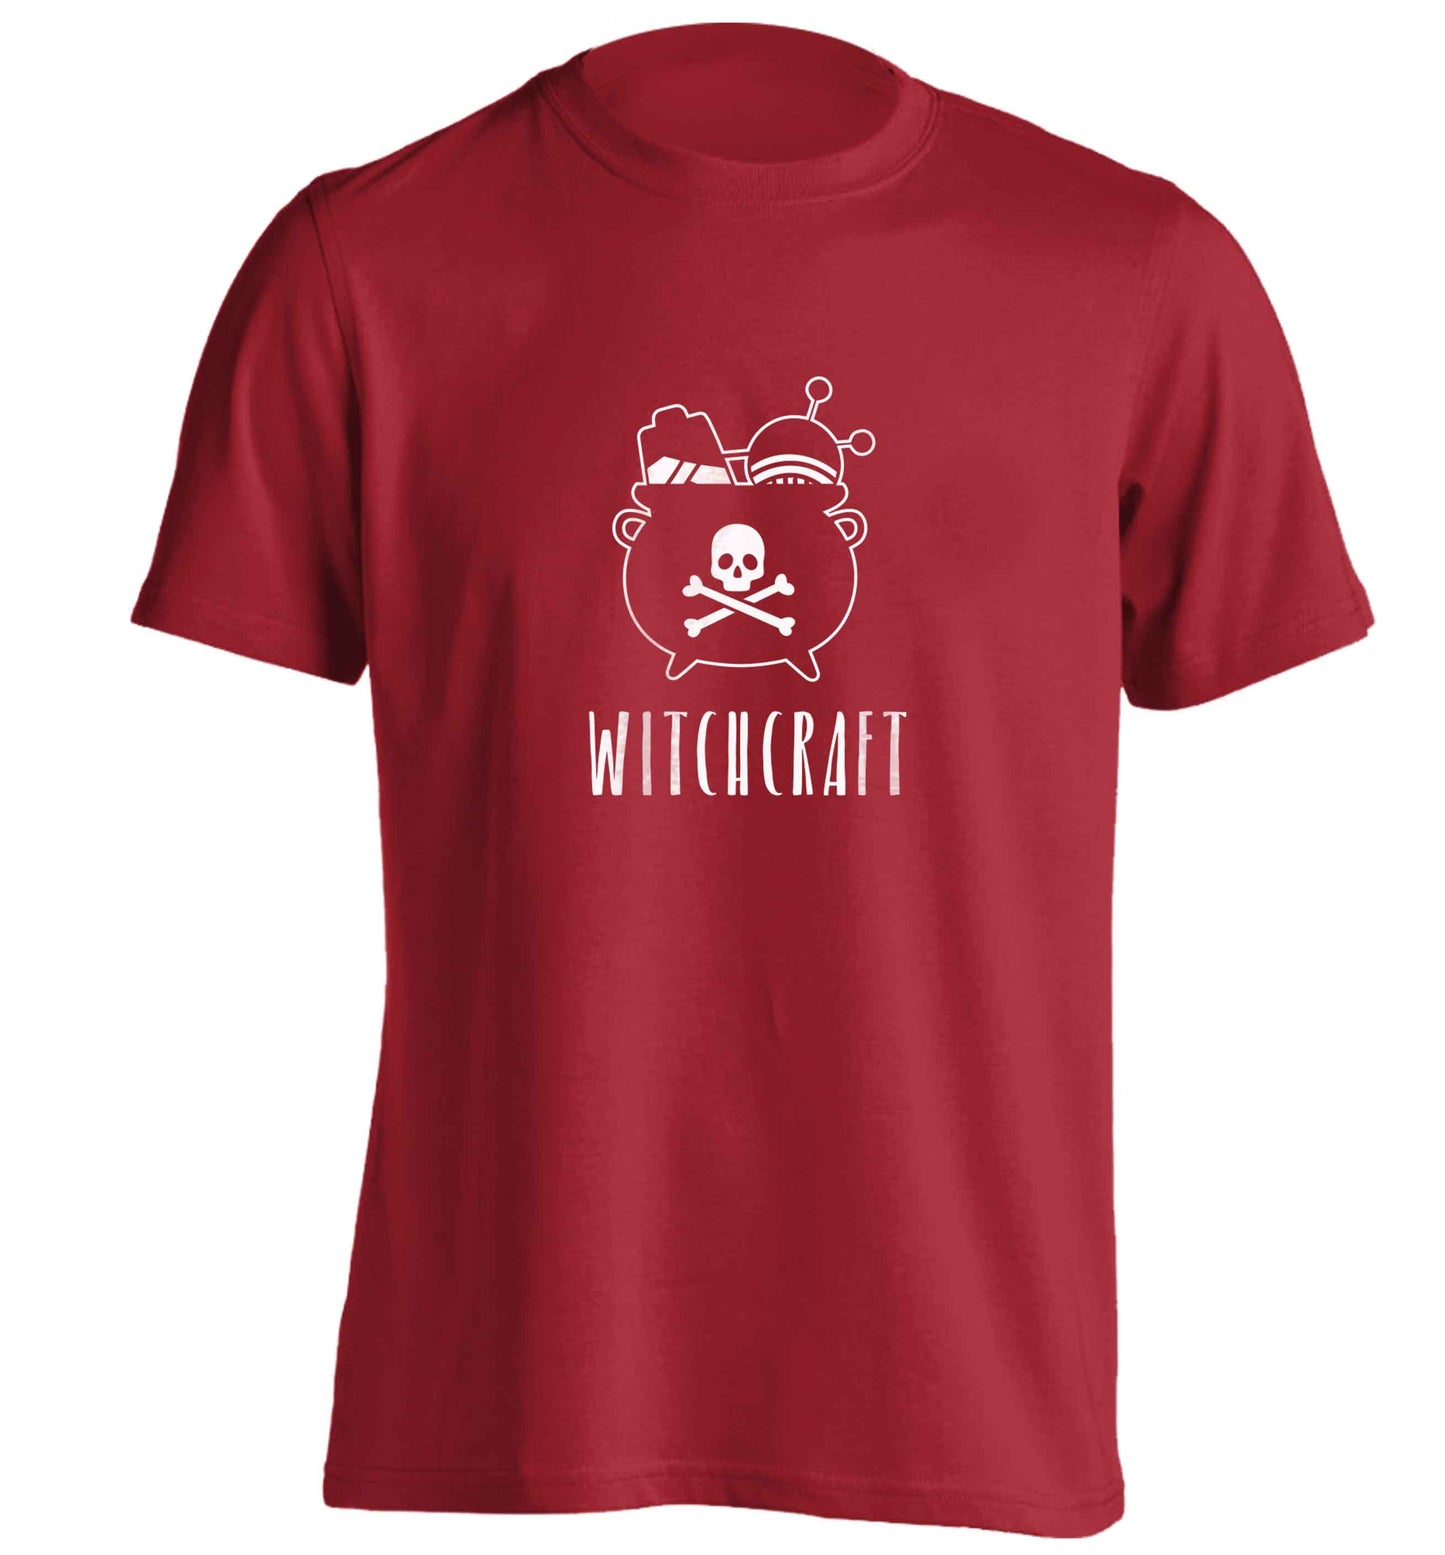 Witchcraft adults unisex red Tshirt 2XL